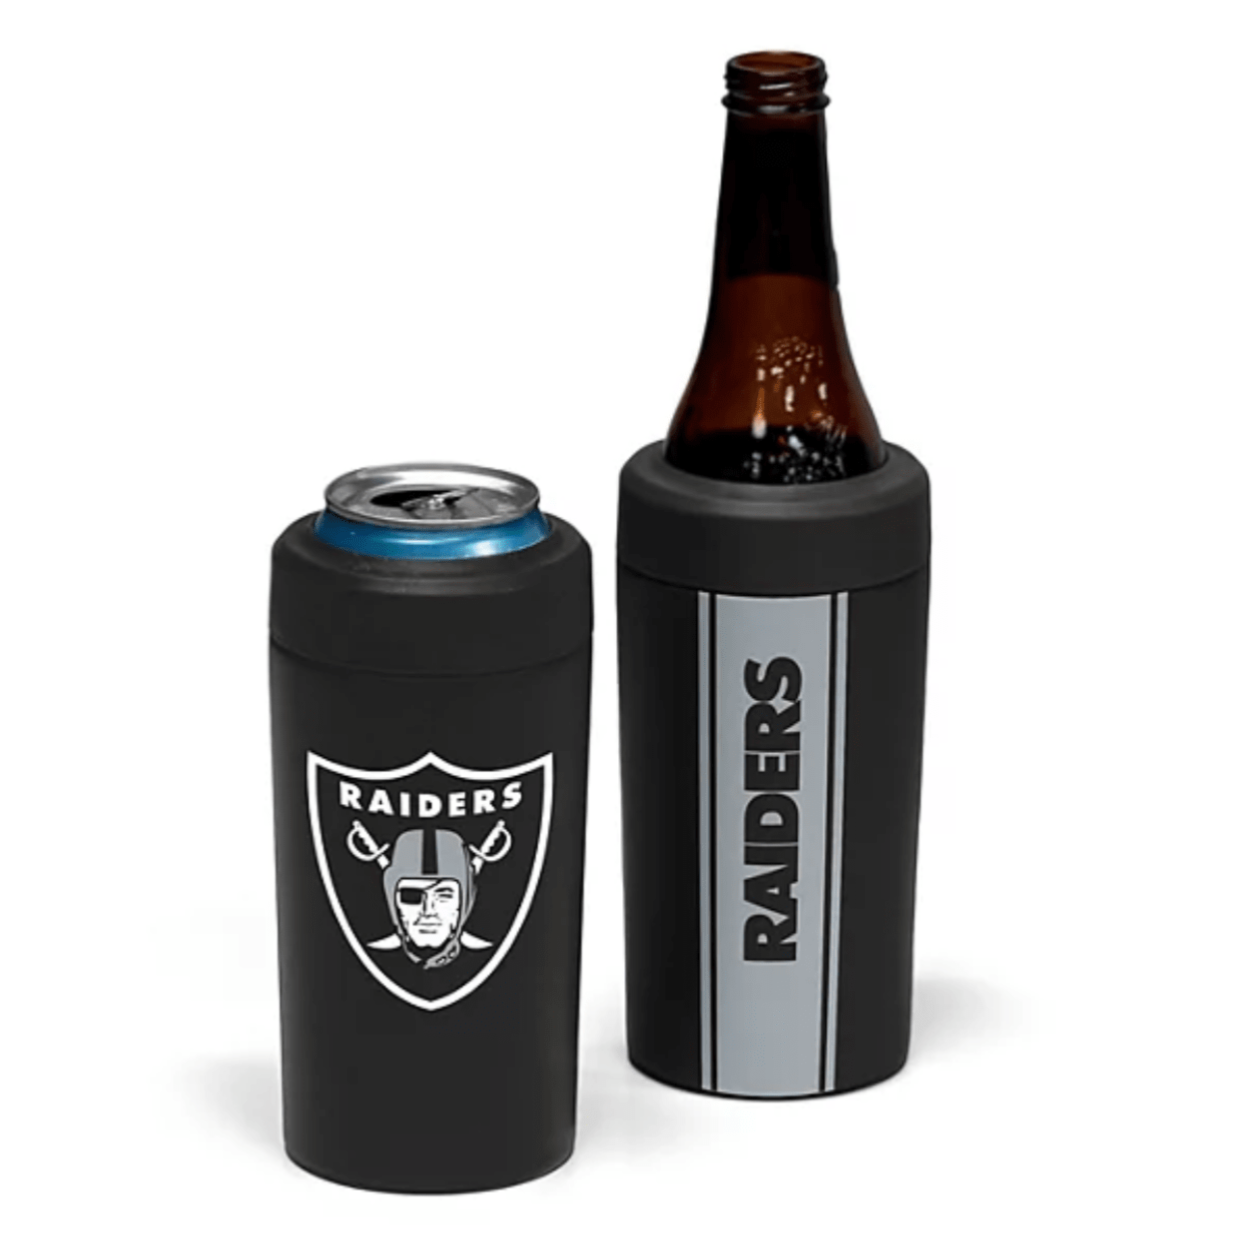 Frost Buddy Universal Buddy 2.0 Can Cooler